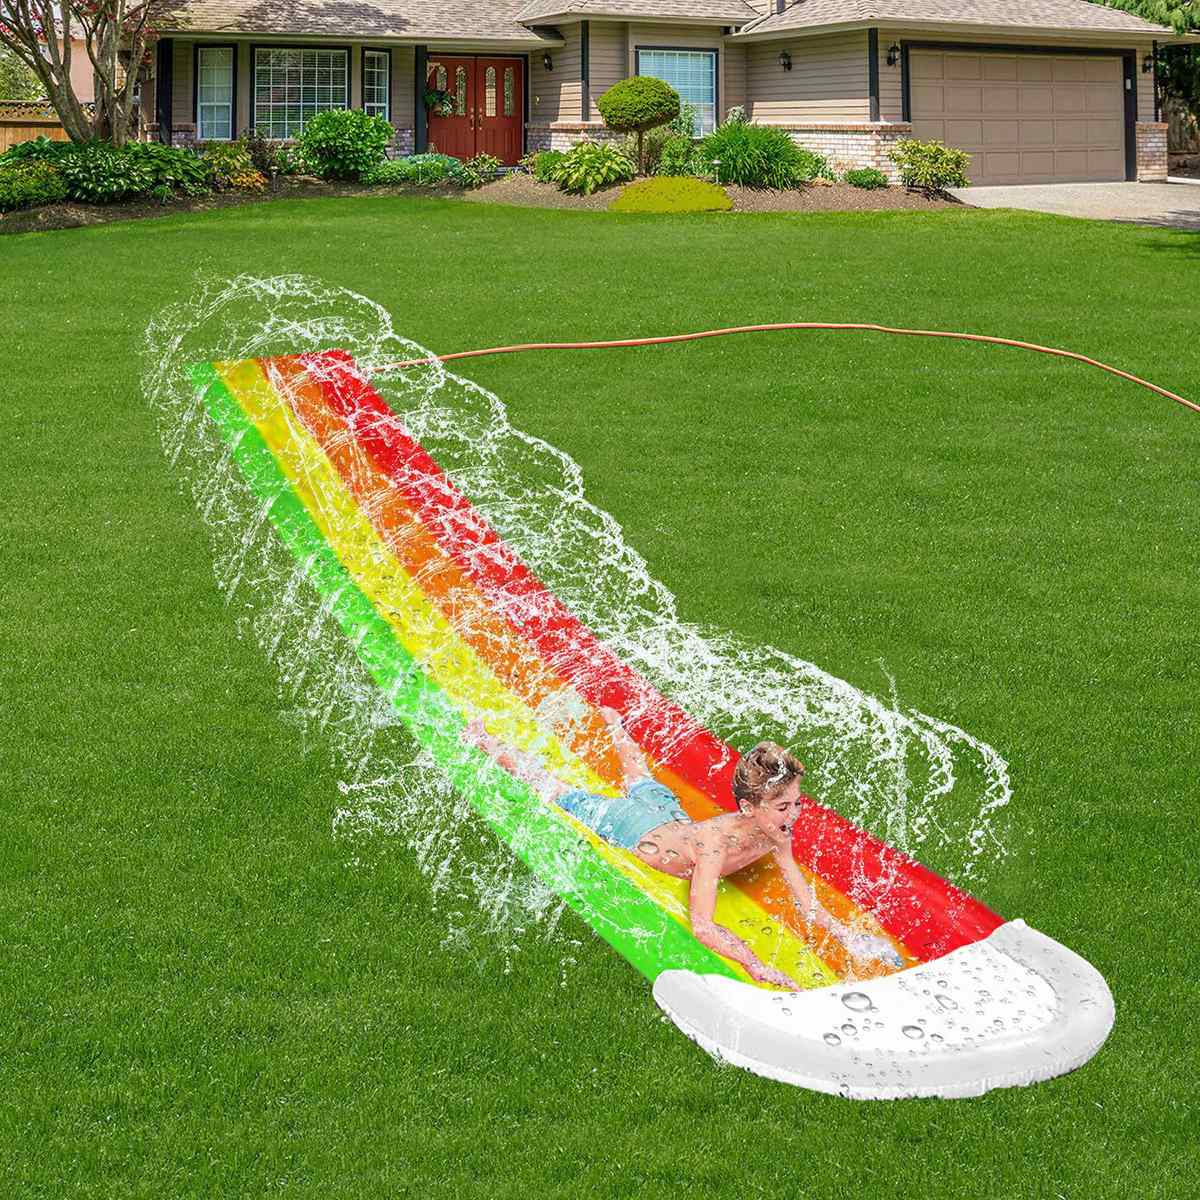 NEW-Giant-Surf-Water-Slide-Fun-Lawn-Water-Slides-Pools-For-Kids-Summer-PVC-Games-Center-2.jpg